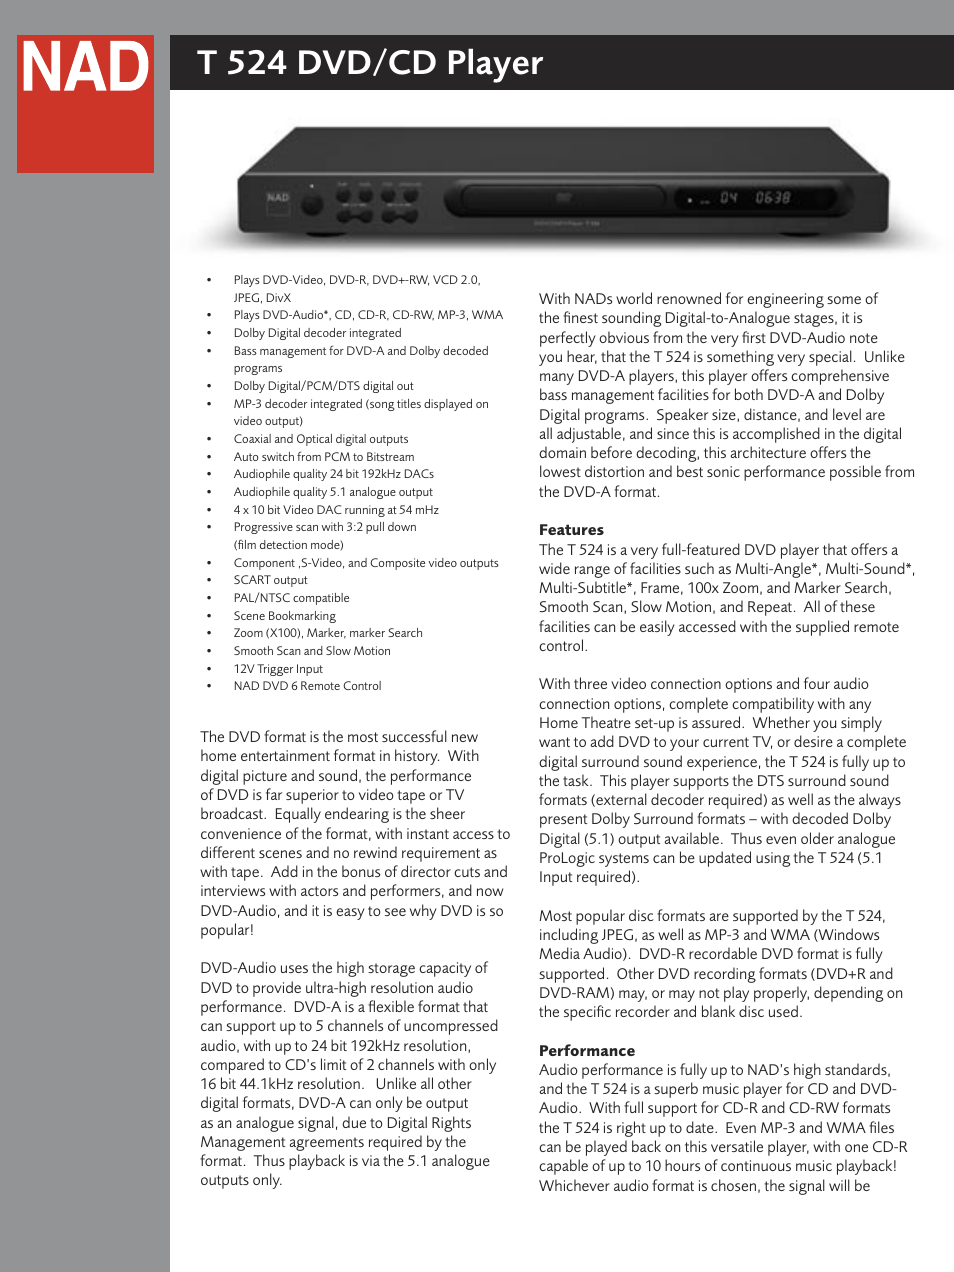 NAD T524 User Manual | 2 pages